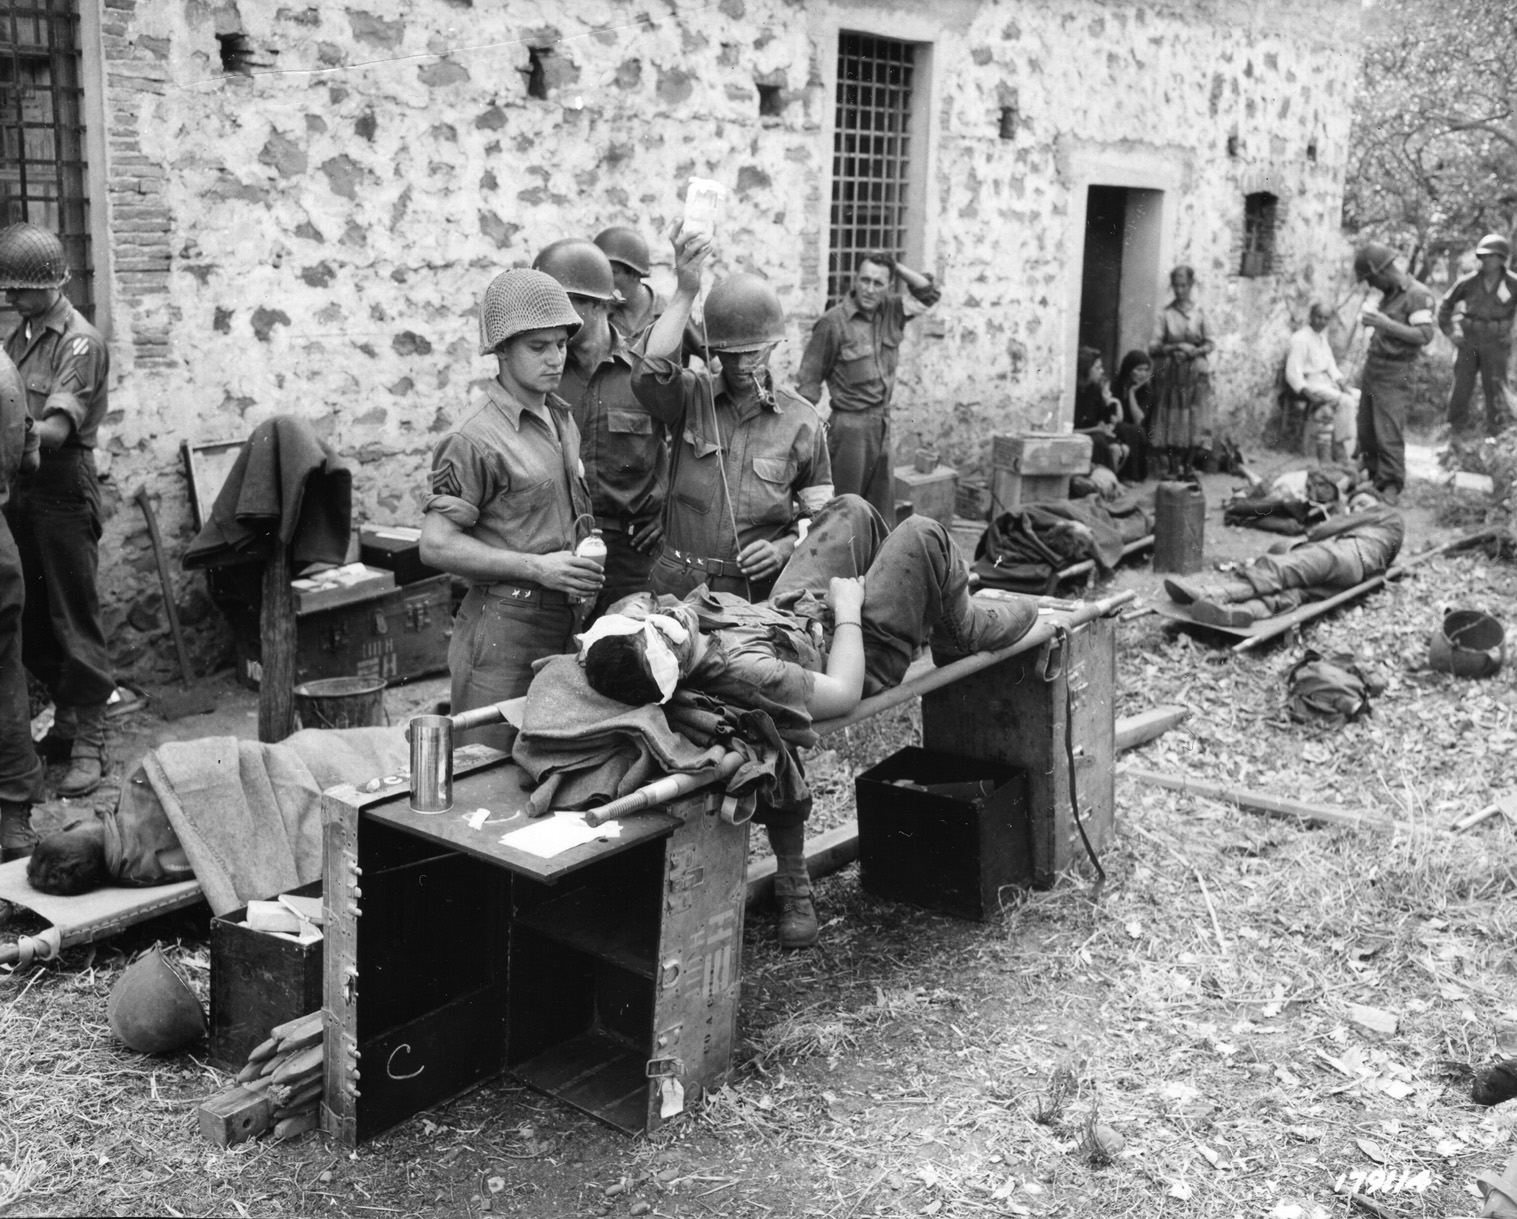 Medics of the 3rd Infantry Division attend to the wounded at an aid station in the town of Sant'Agata, between Palermo and Messina, August 9, 1943.